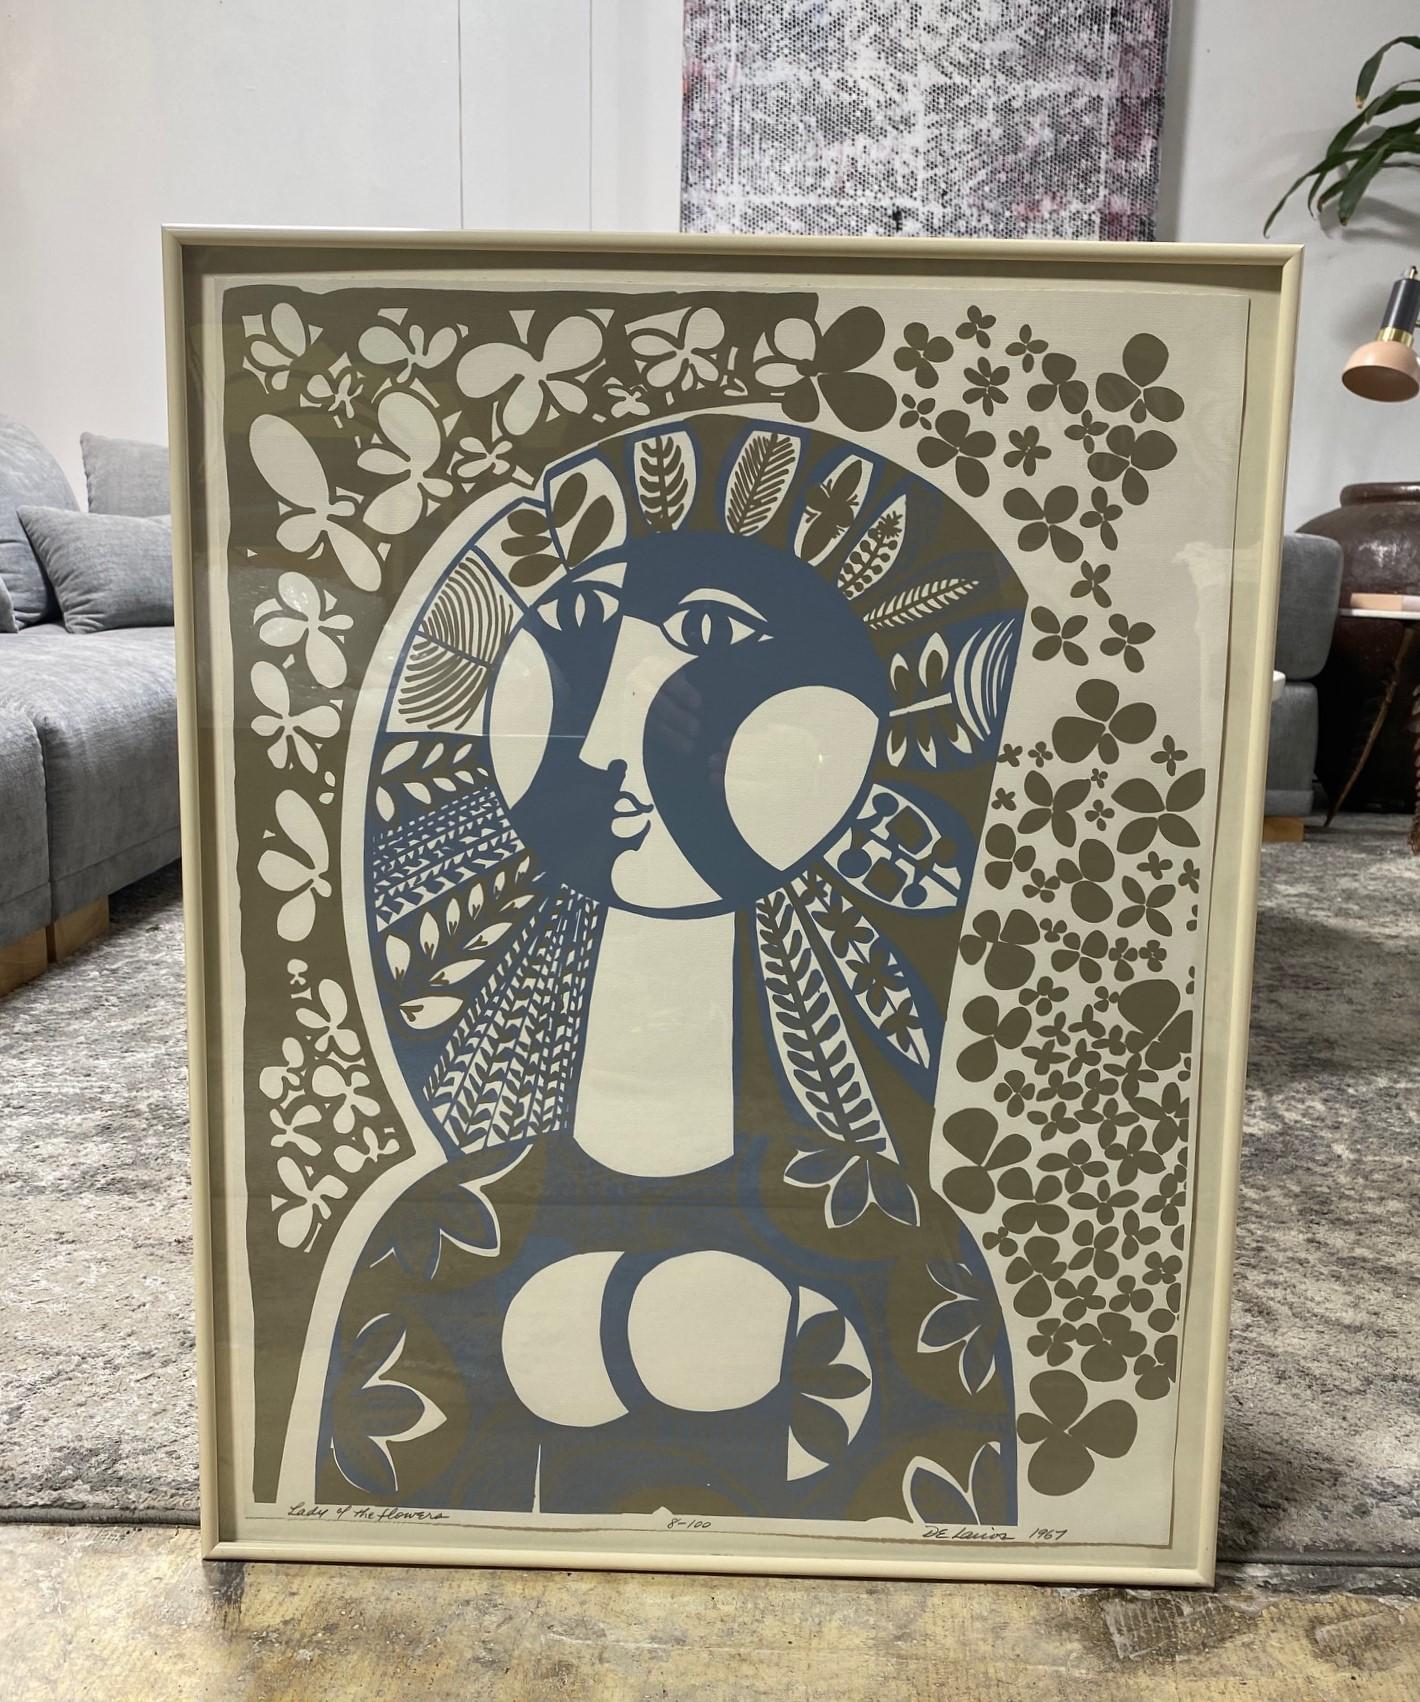 A gorgeous, striking, limited edition screenprint titled 